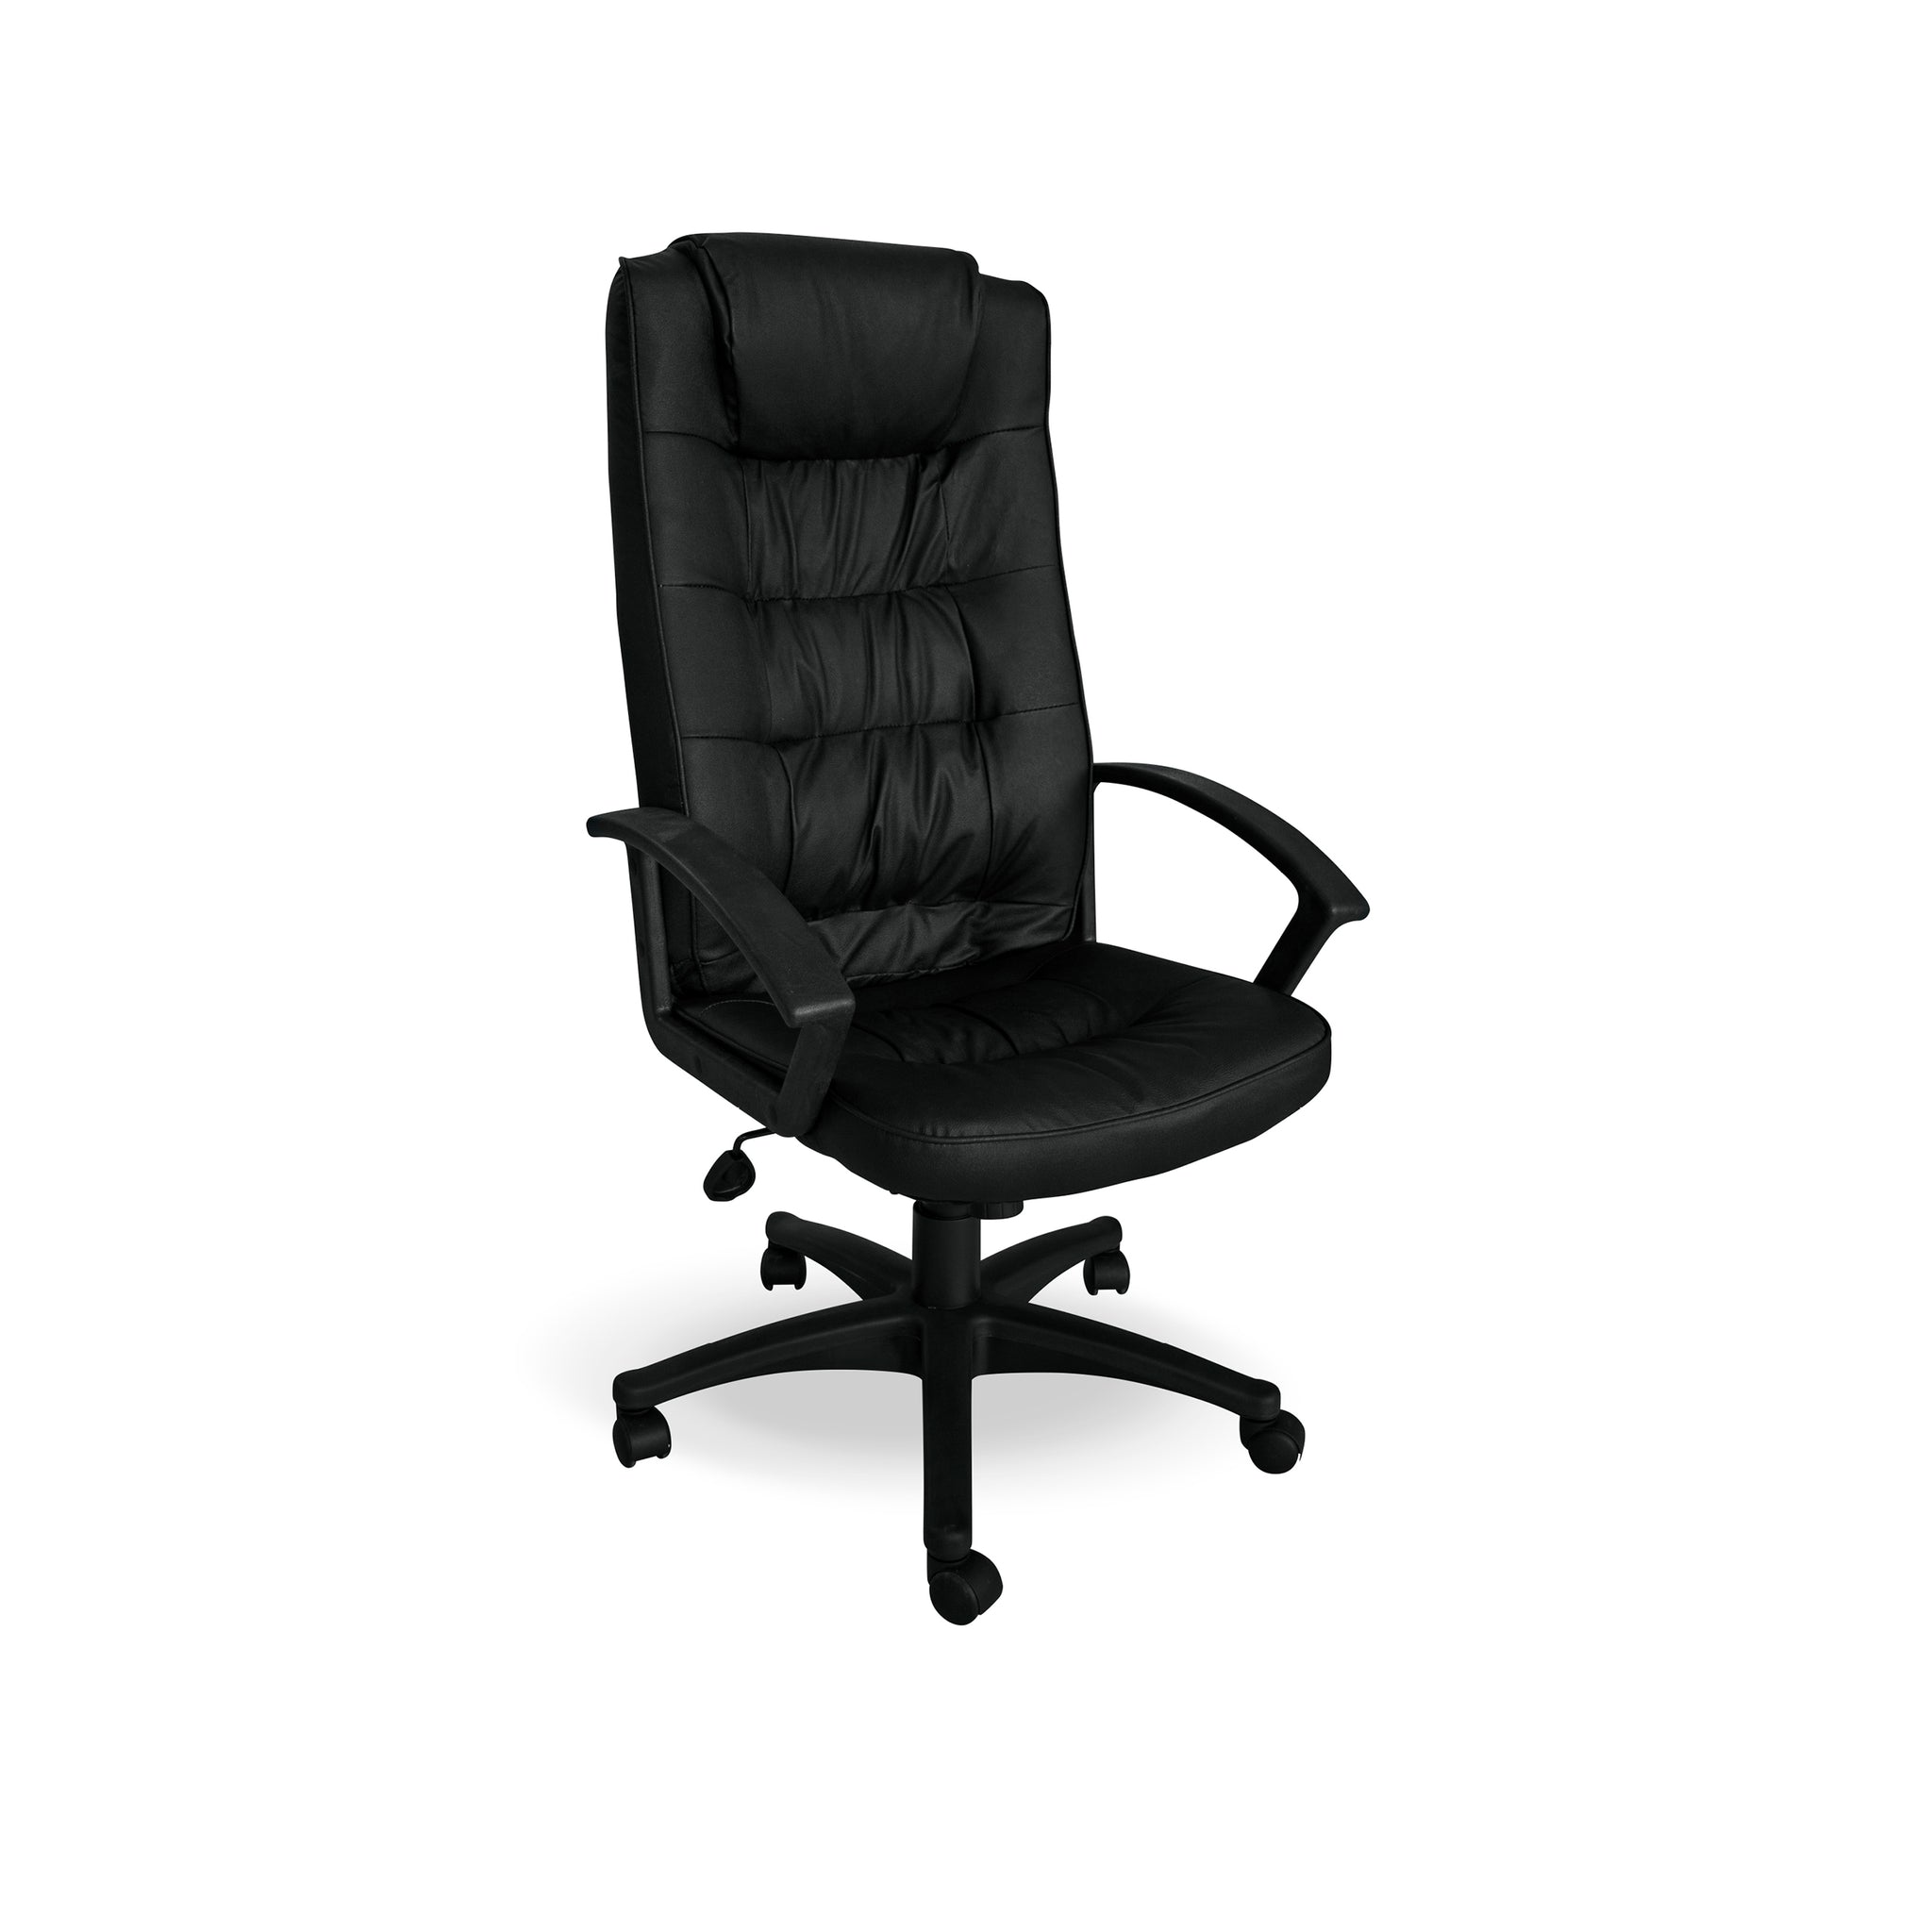 Hedcor concorde high back office chair